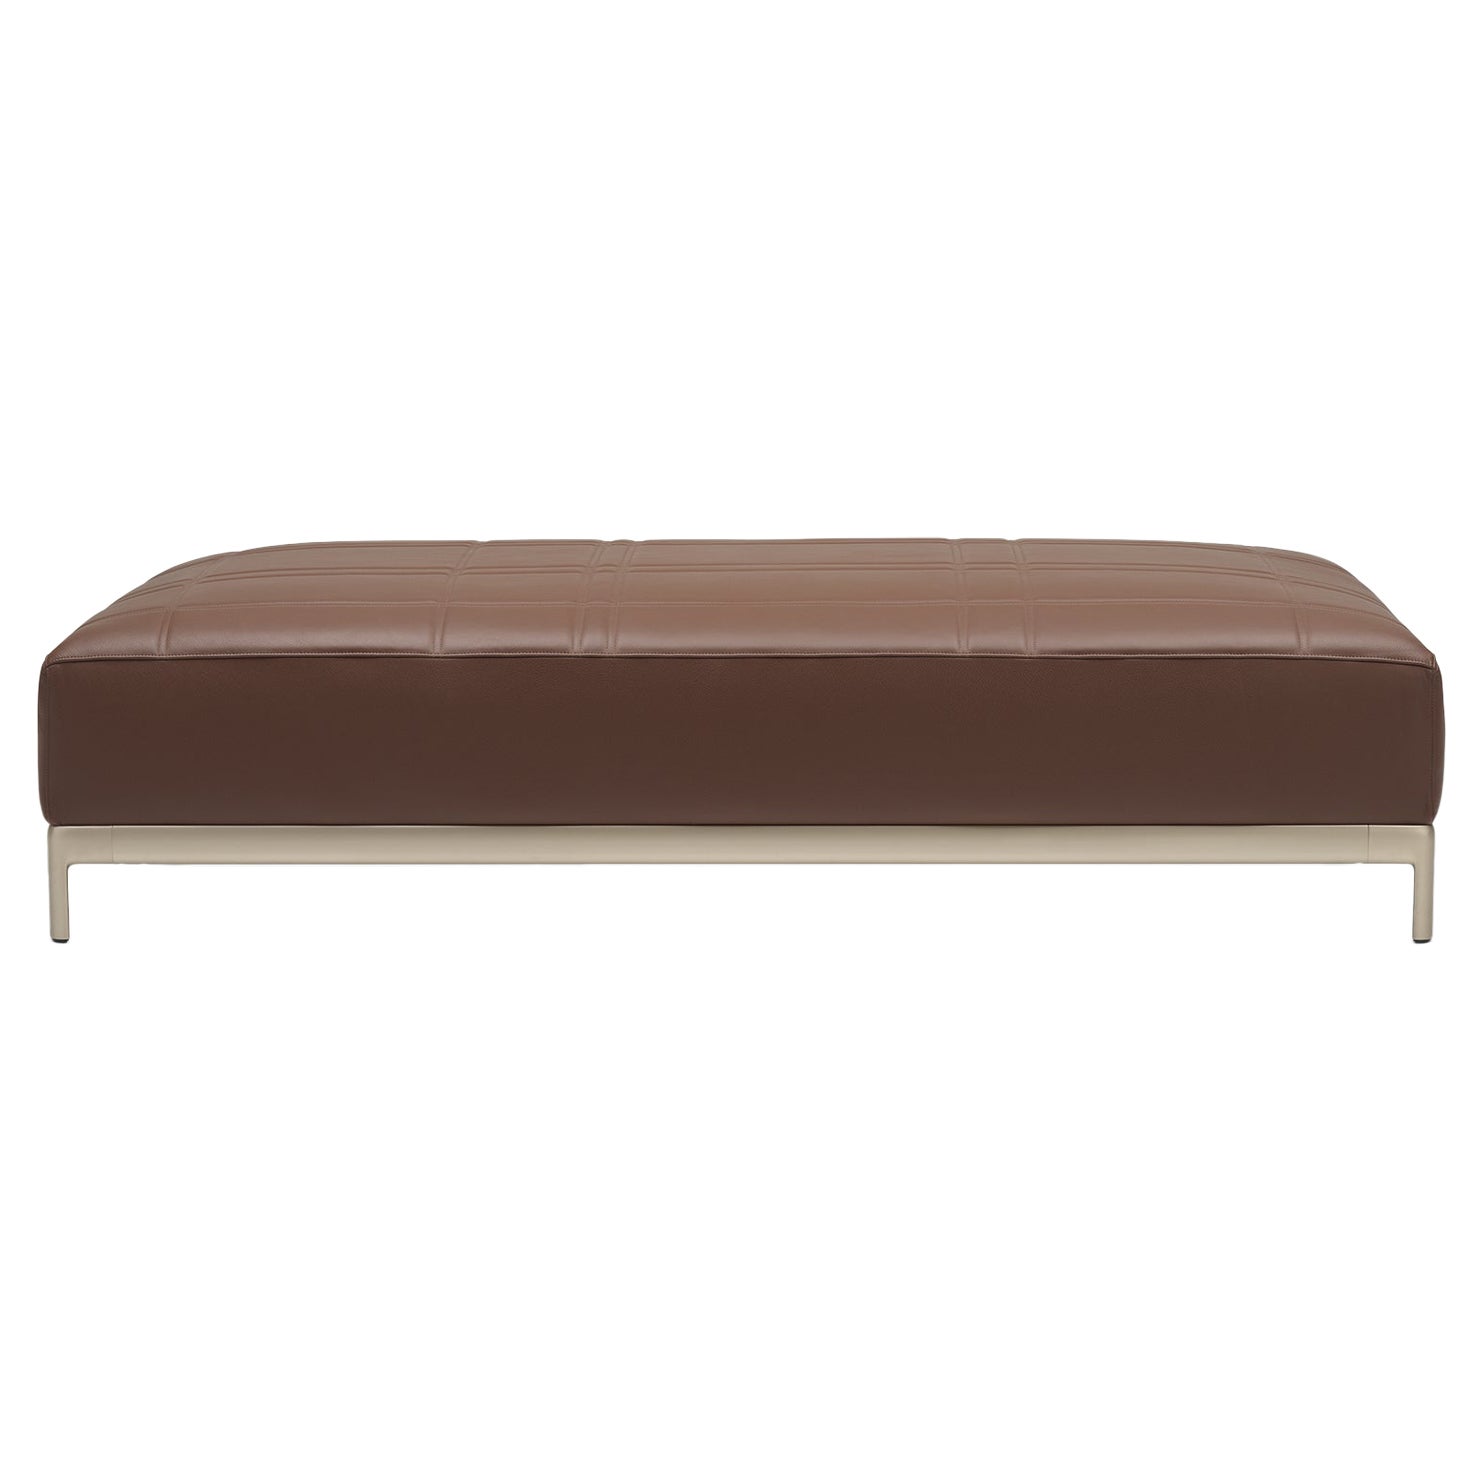 Alias P52 AluZen Soft Bench in Brown Leather Seat and Anodized Gold Frame For Sale